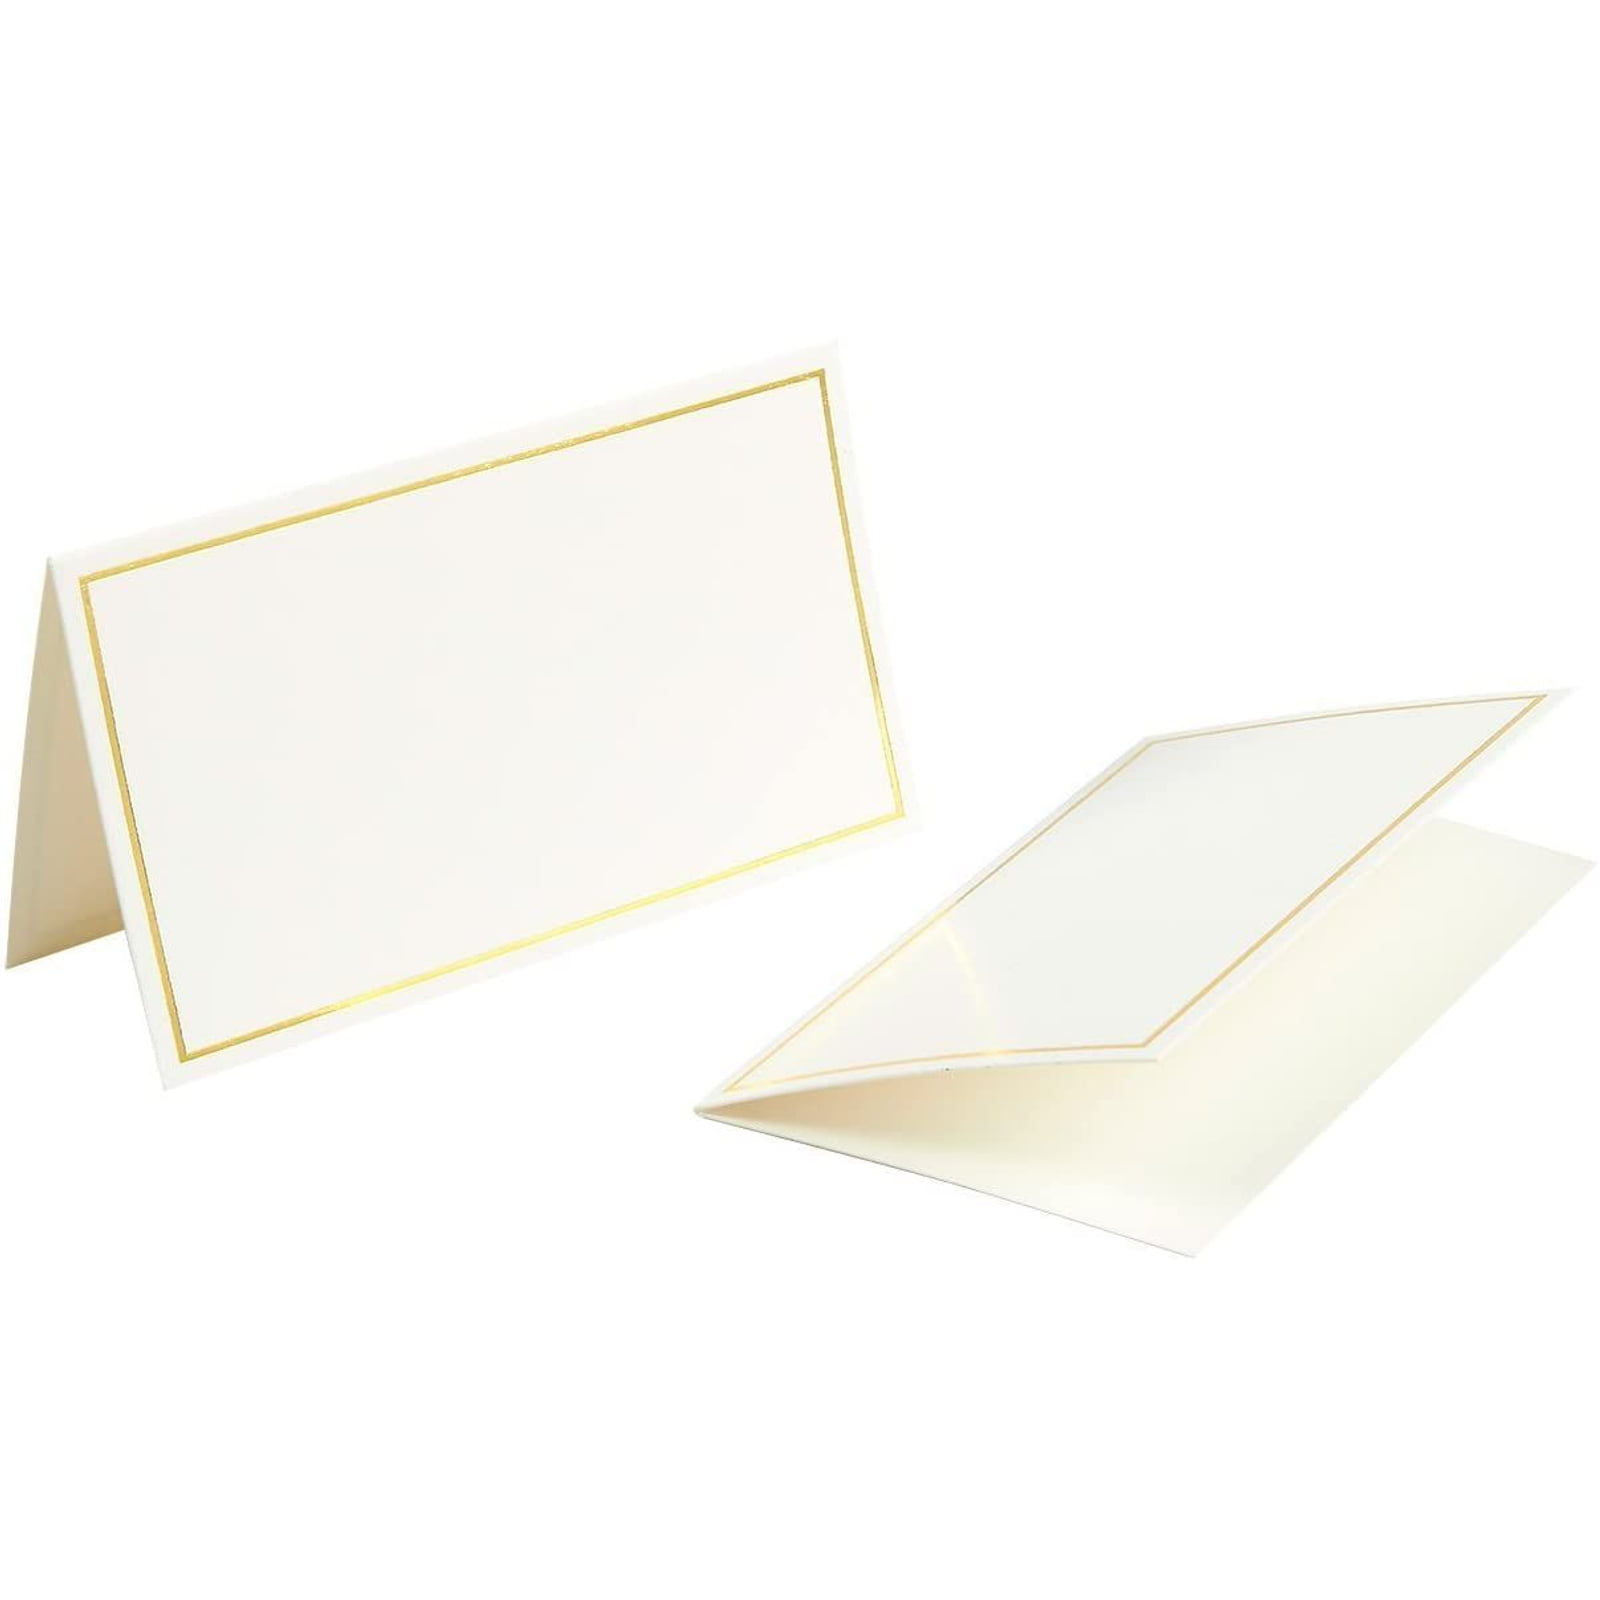 Small Tent Cards with Gold Foil Border Events 2 x 3.5 Inches Perfect for Weddings JABINCO Pack of 100 Place Cards Banquets